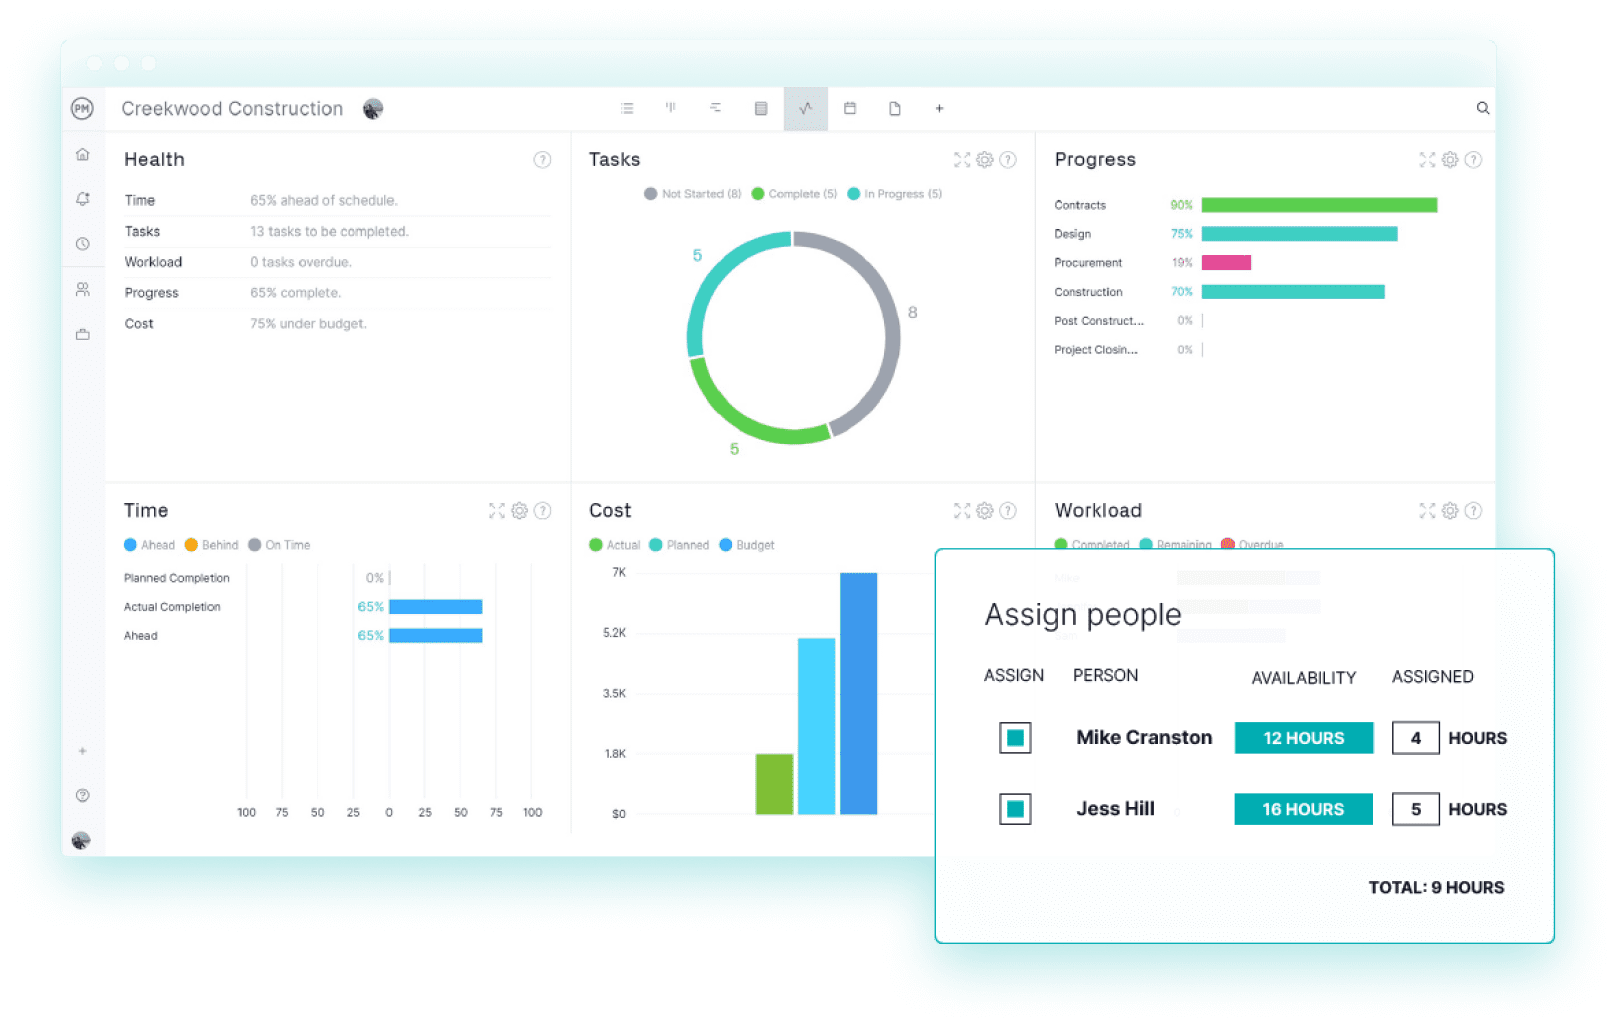 ProjectManager is a project planning software that's ideal for construction, as shown in this dashboard